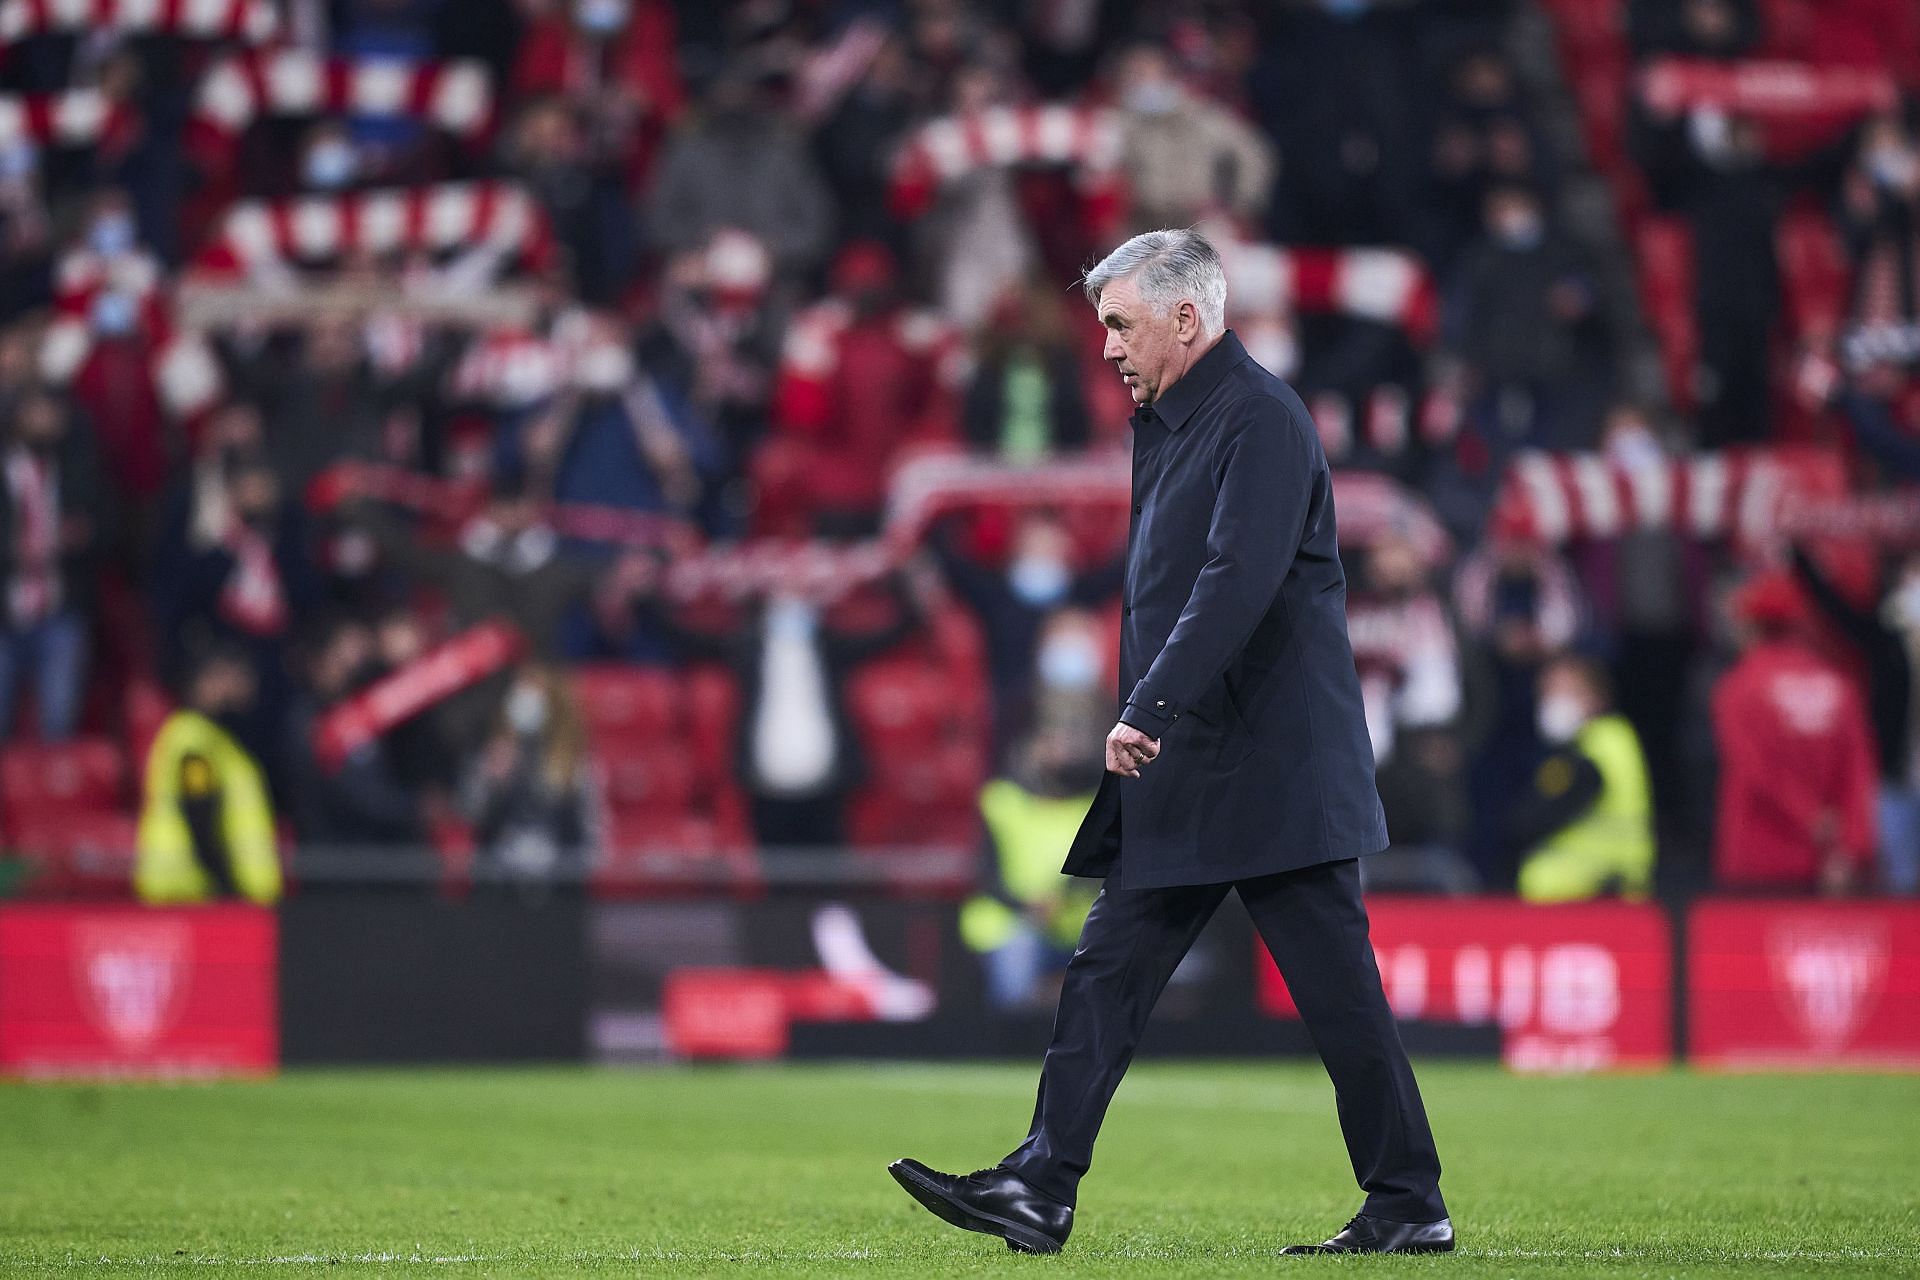 Ancelotti is starting to feel the pressure after seeing his team eliminated from the Copa Del Rey